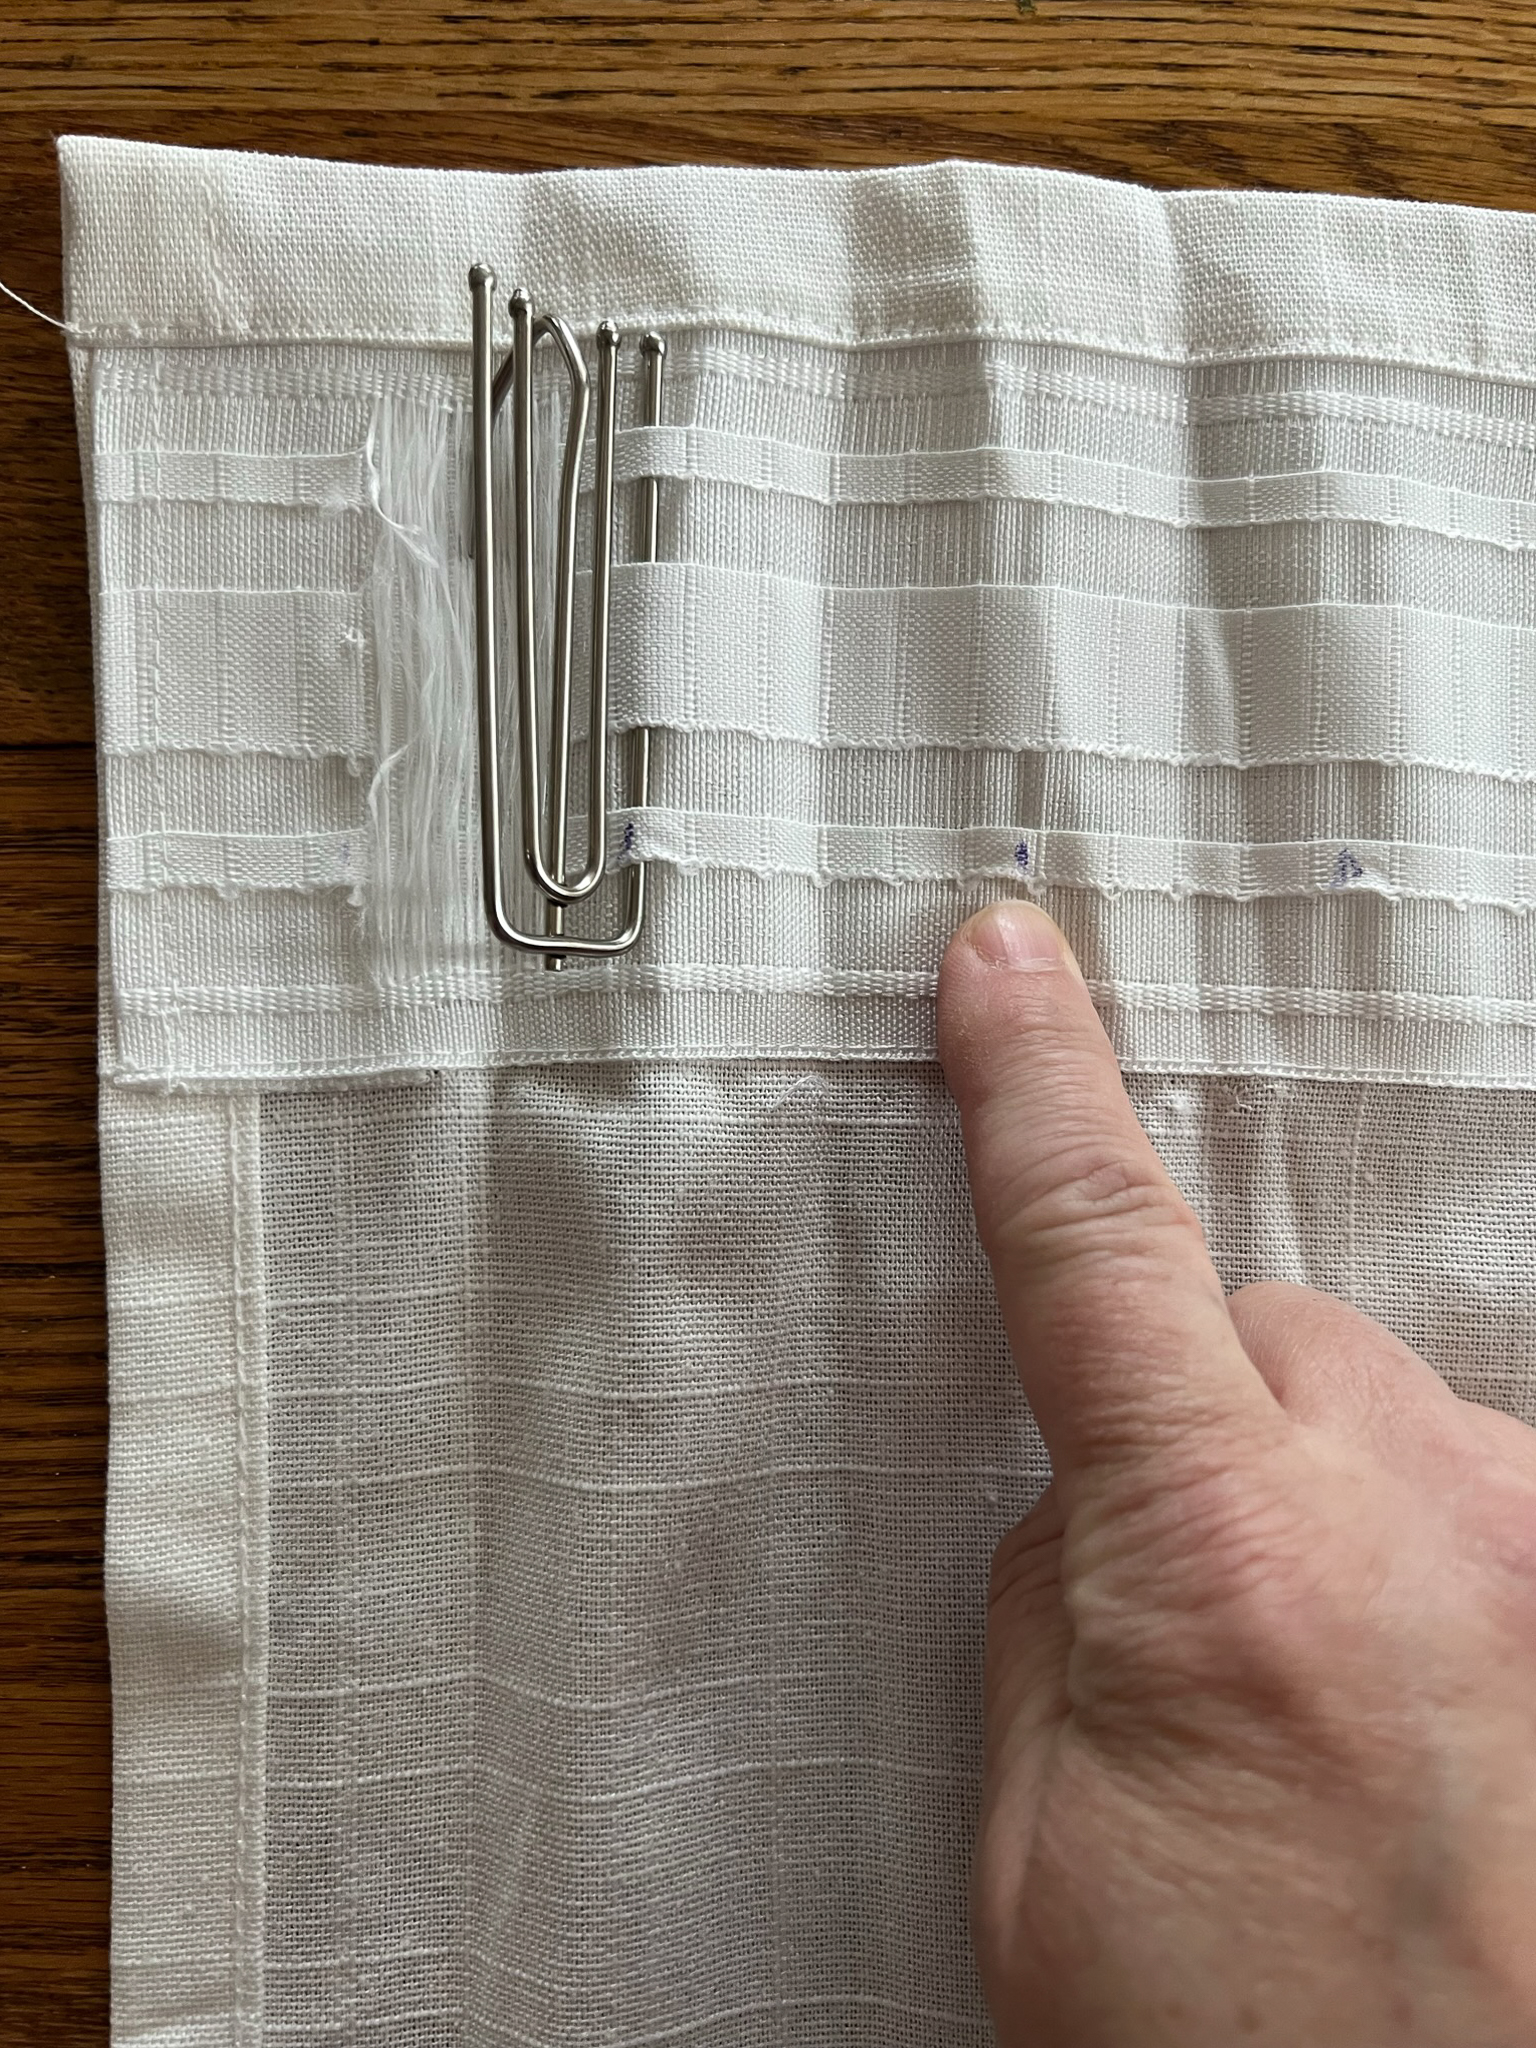 The first prong of the curtain hook has been inserted and the location of the next prong is marked with a pen, with a finger pointing to it.